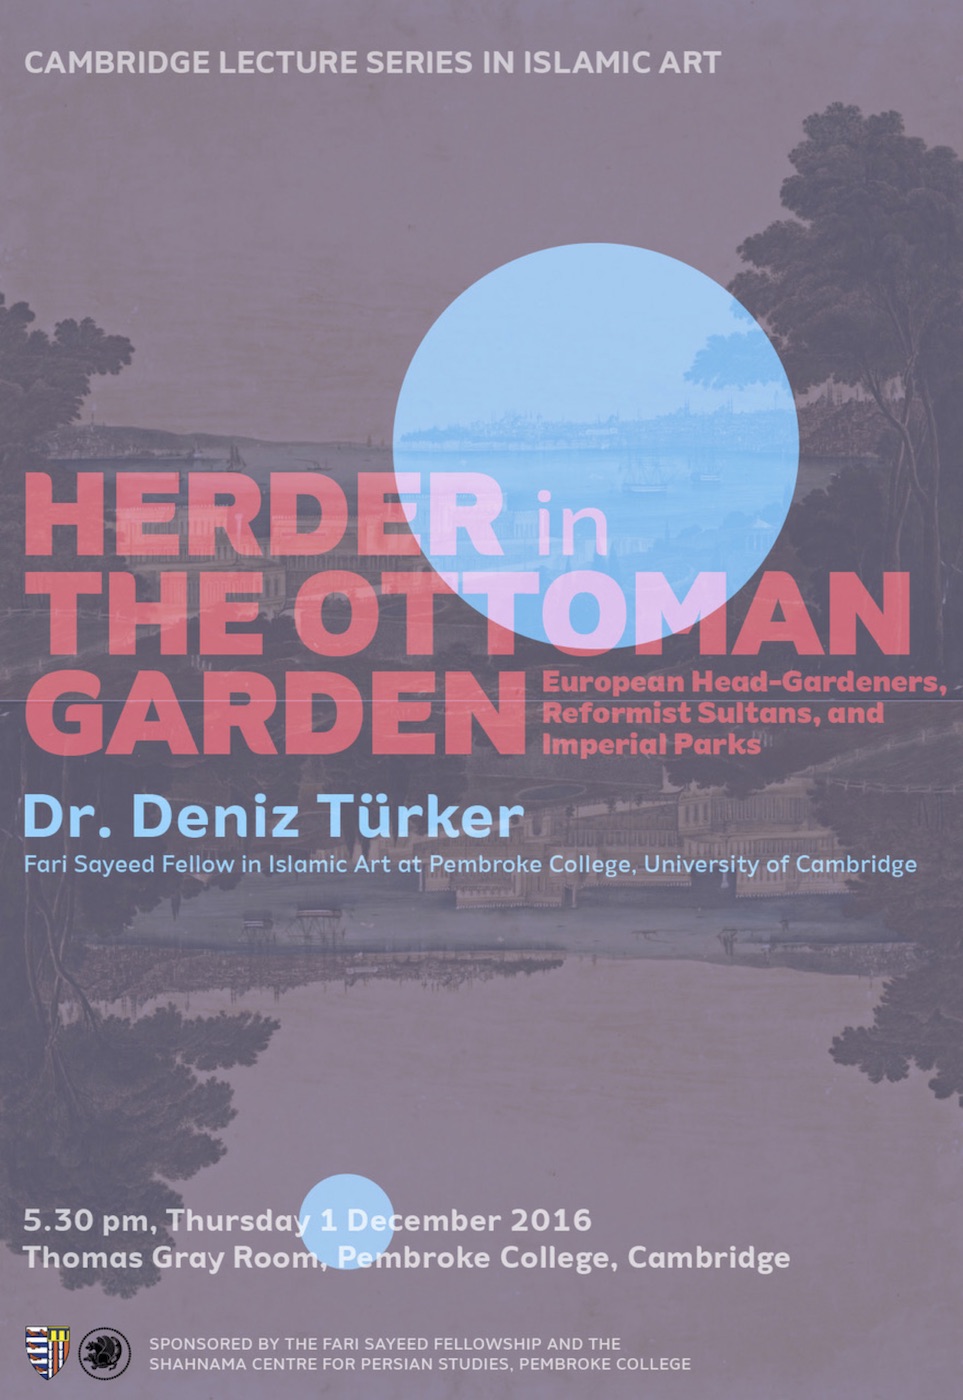 Herder in the Ottoman Garden: European head-gardeners, reformist Sultans, and imperial parks's image